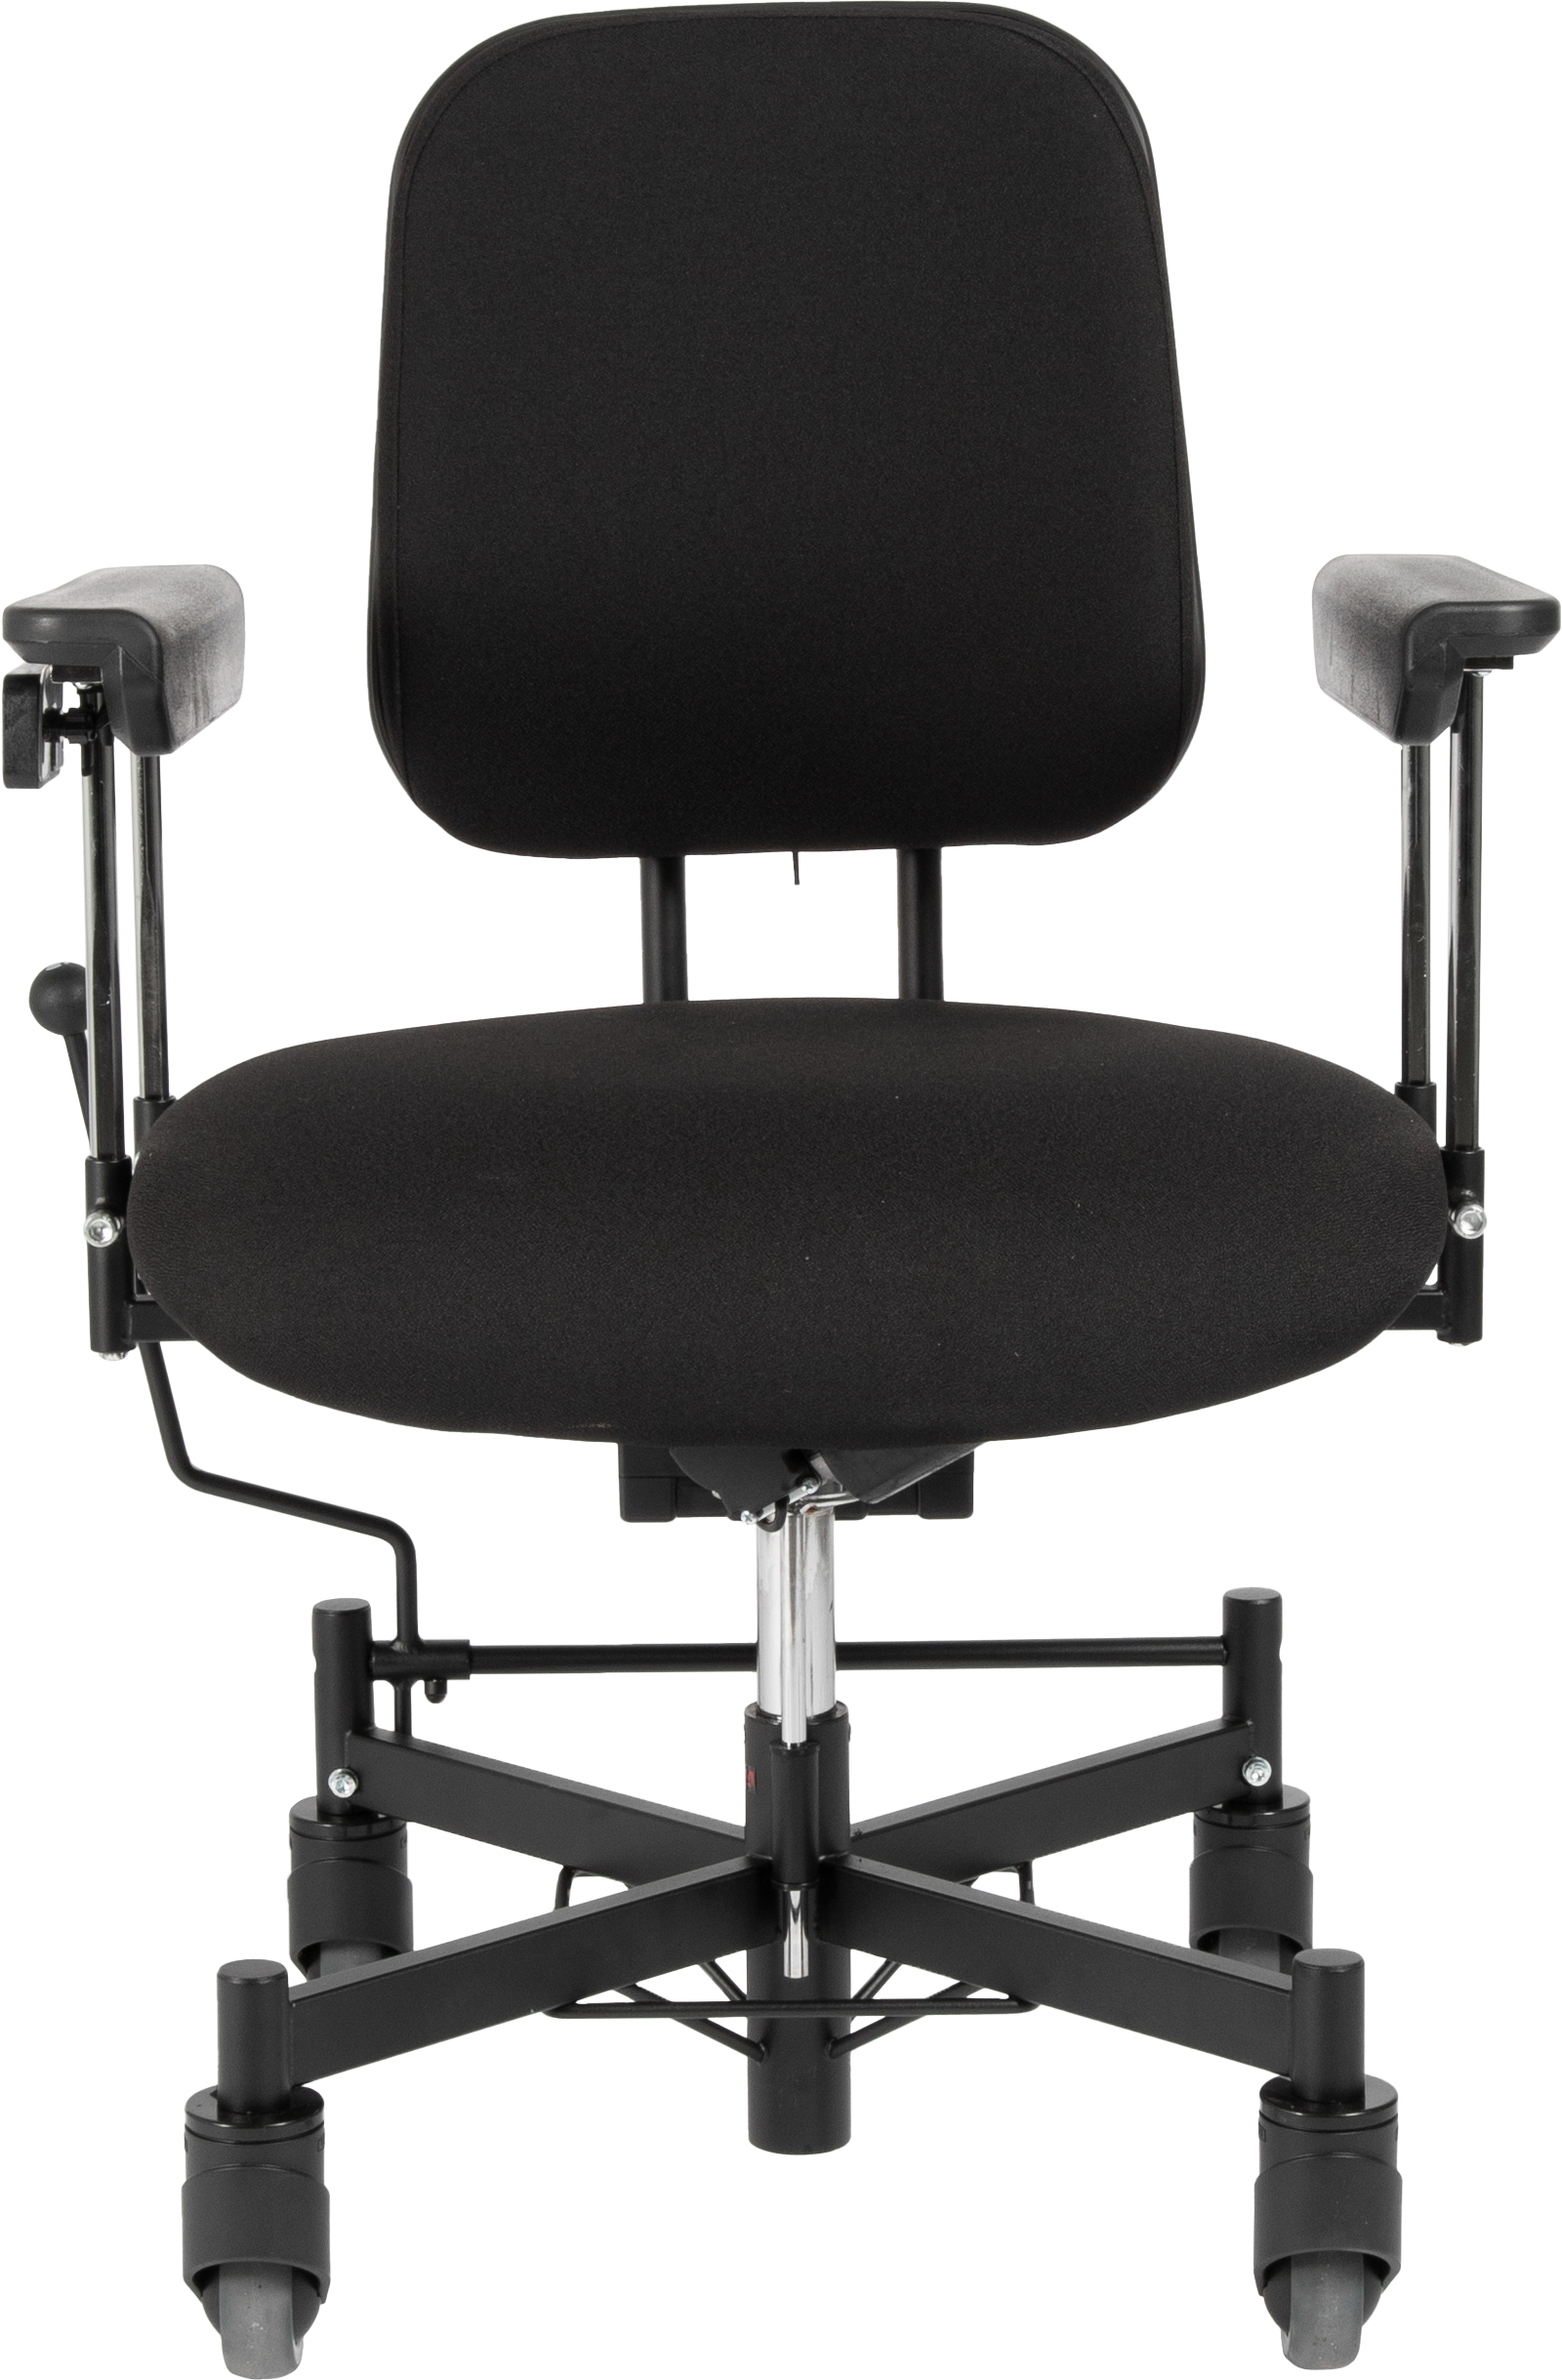 VELA Chair for Bariatric Users (200-300kg)